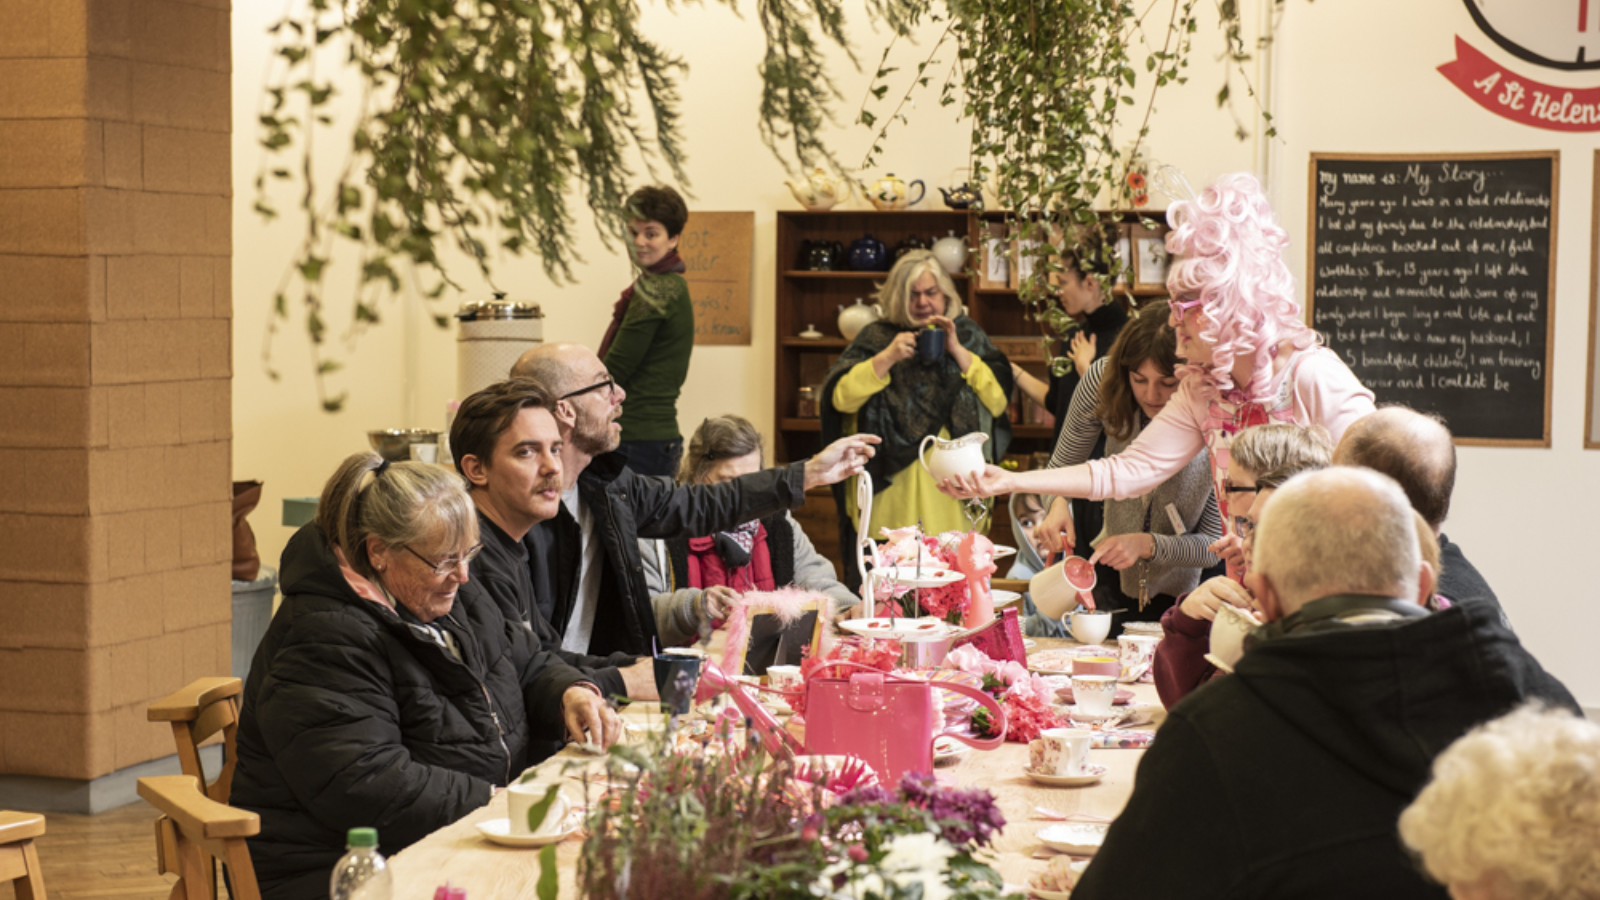 A long table set with a pink table cloth, tea set and decorations. A number of people sit around the table. A woman in a pink wig is serving tea. Greenery hangs down and there is lavender on the table.